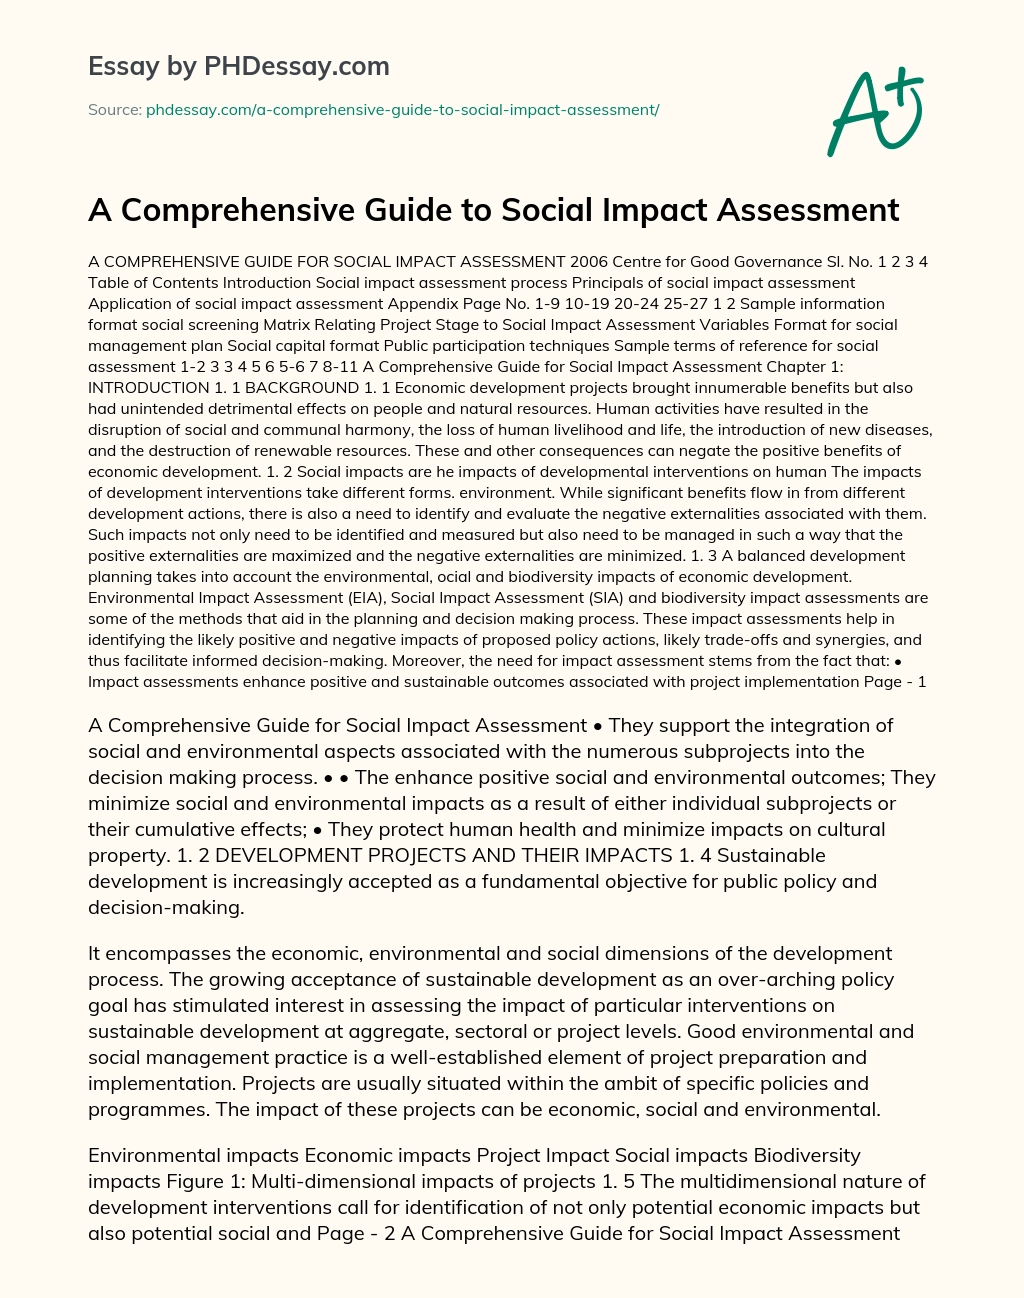 A Comprehensive Guide to Social Impact Assessment essay